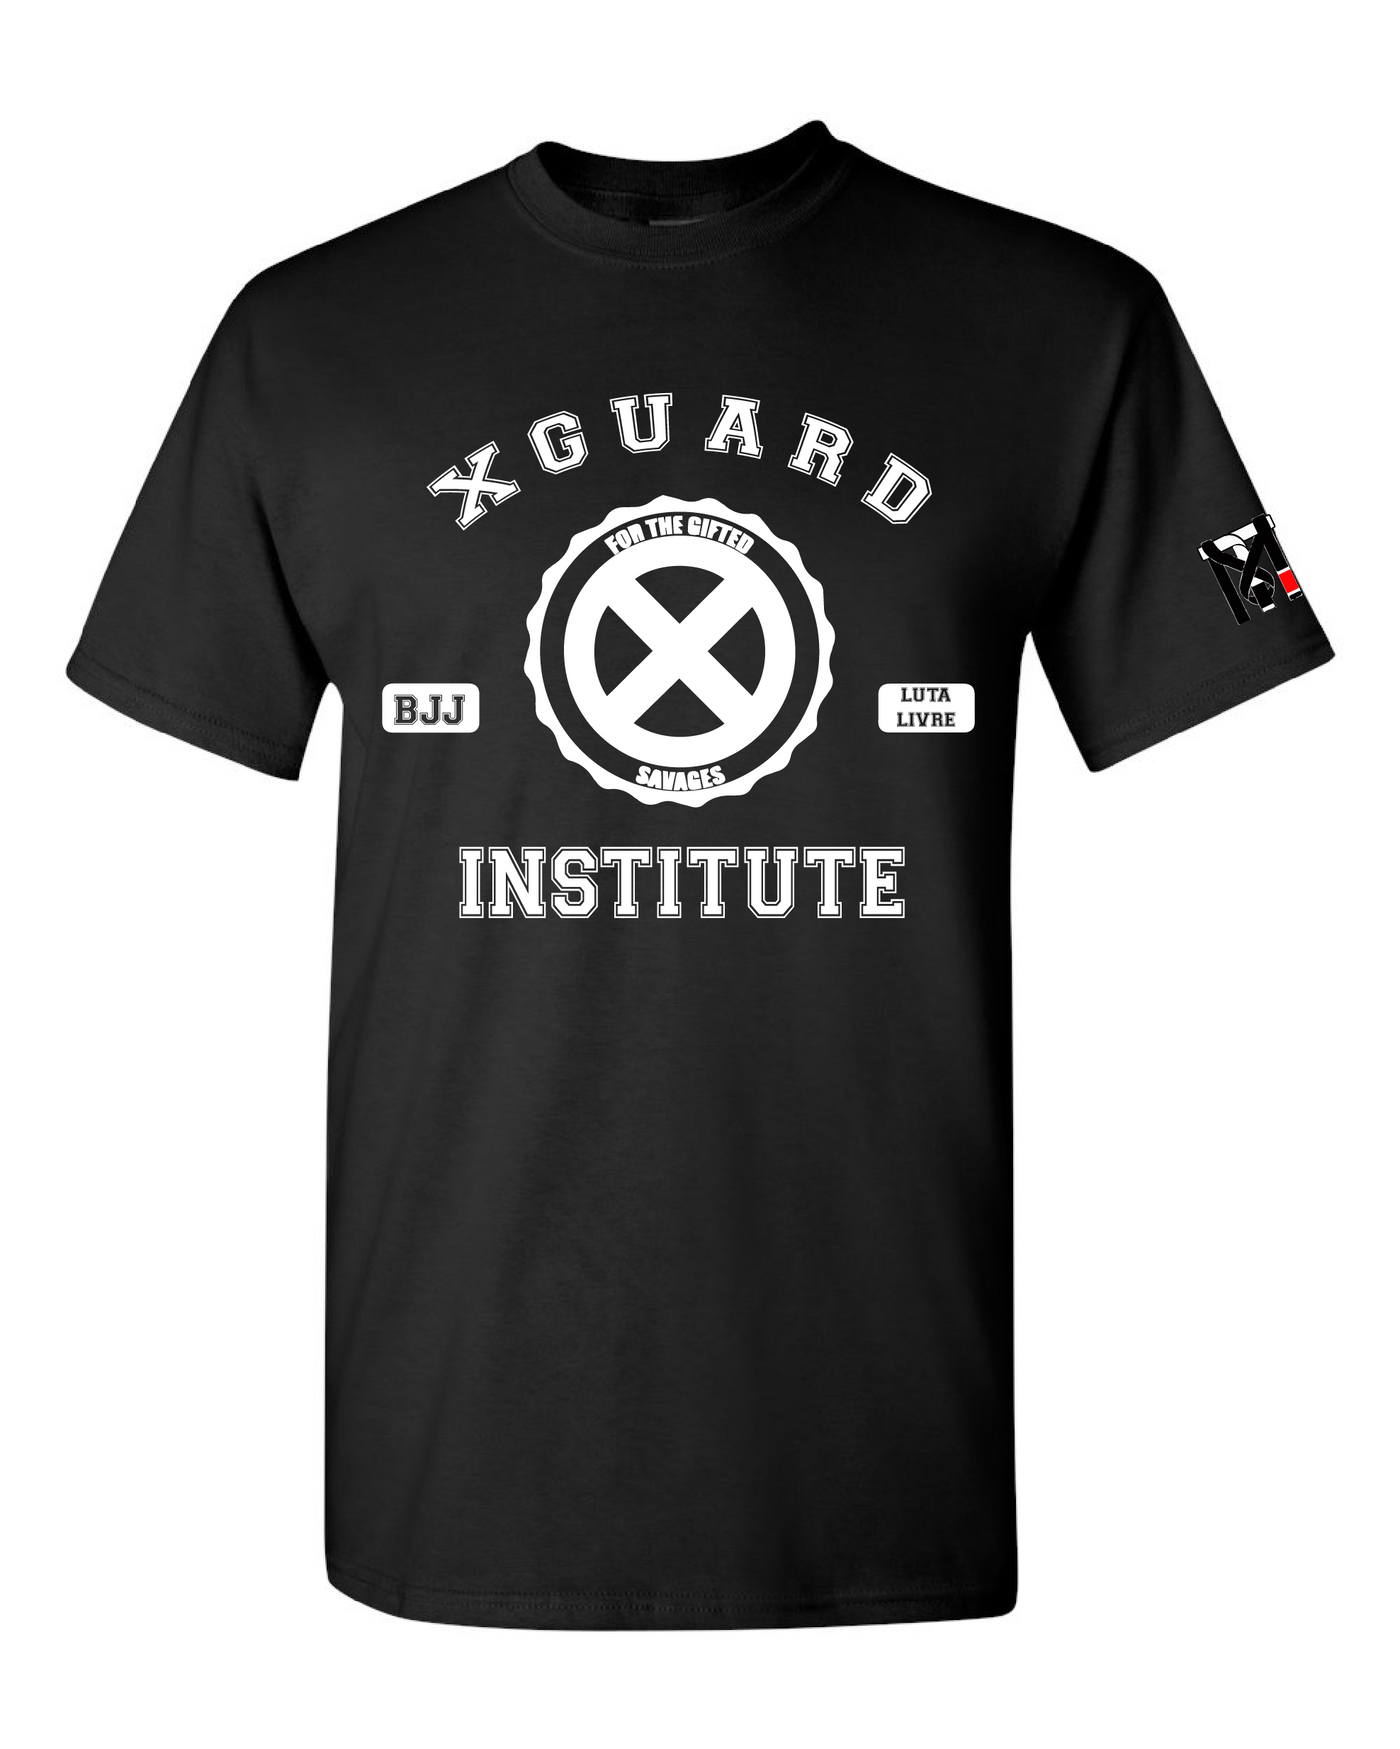 X Guard Institute For The Gifted Savages